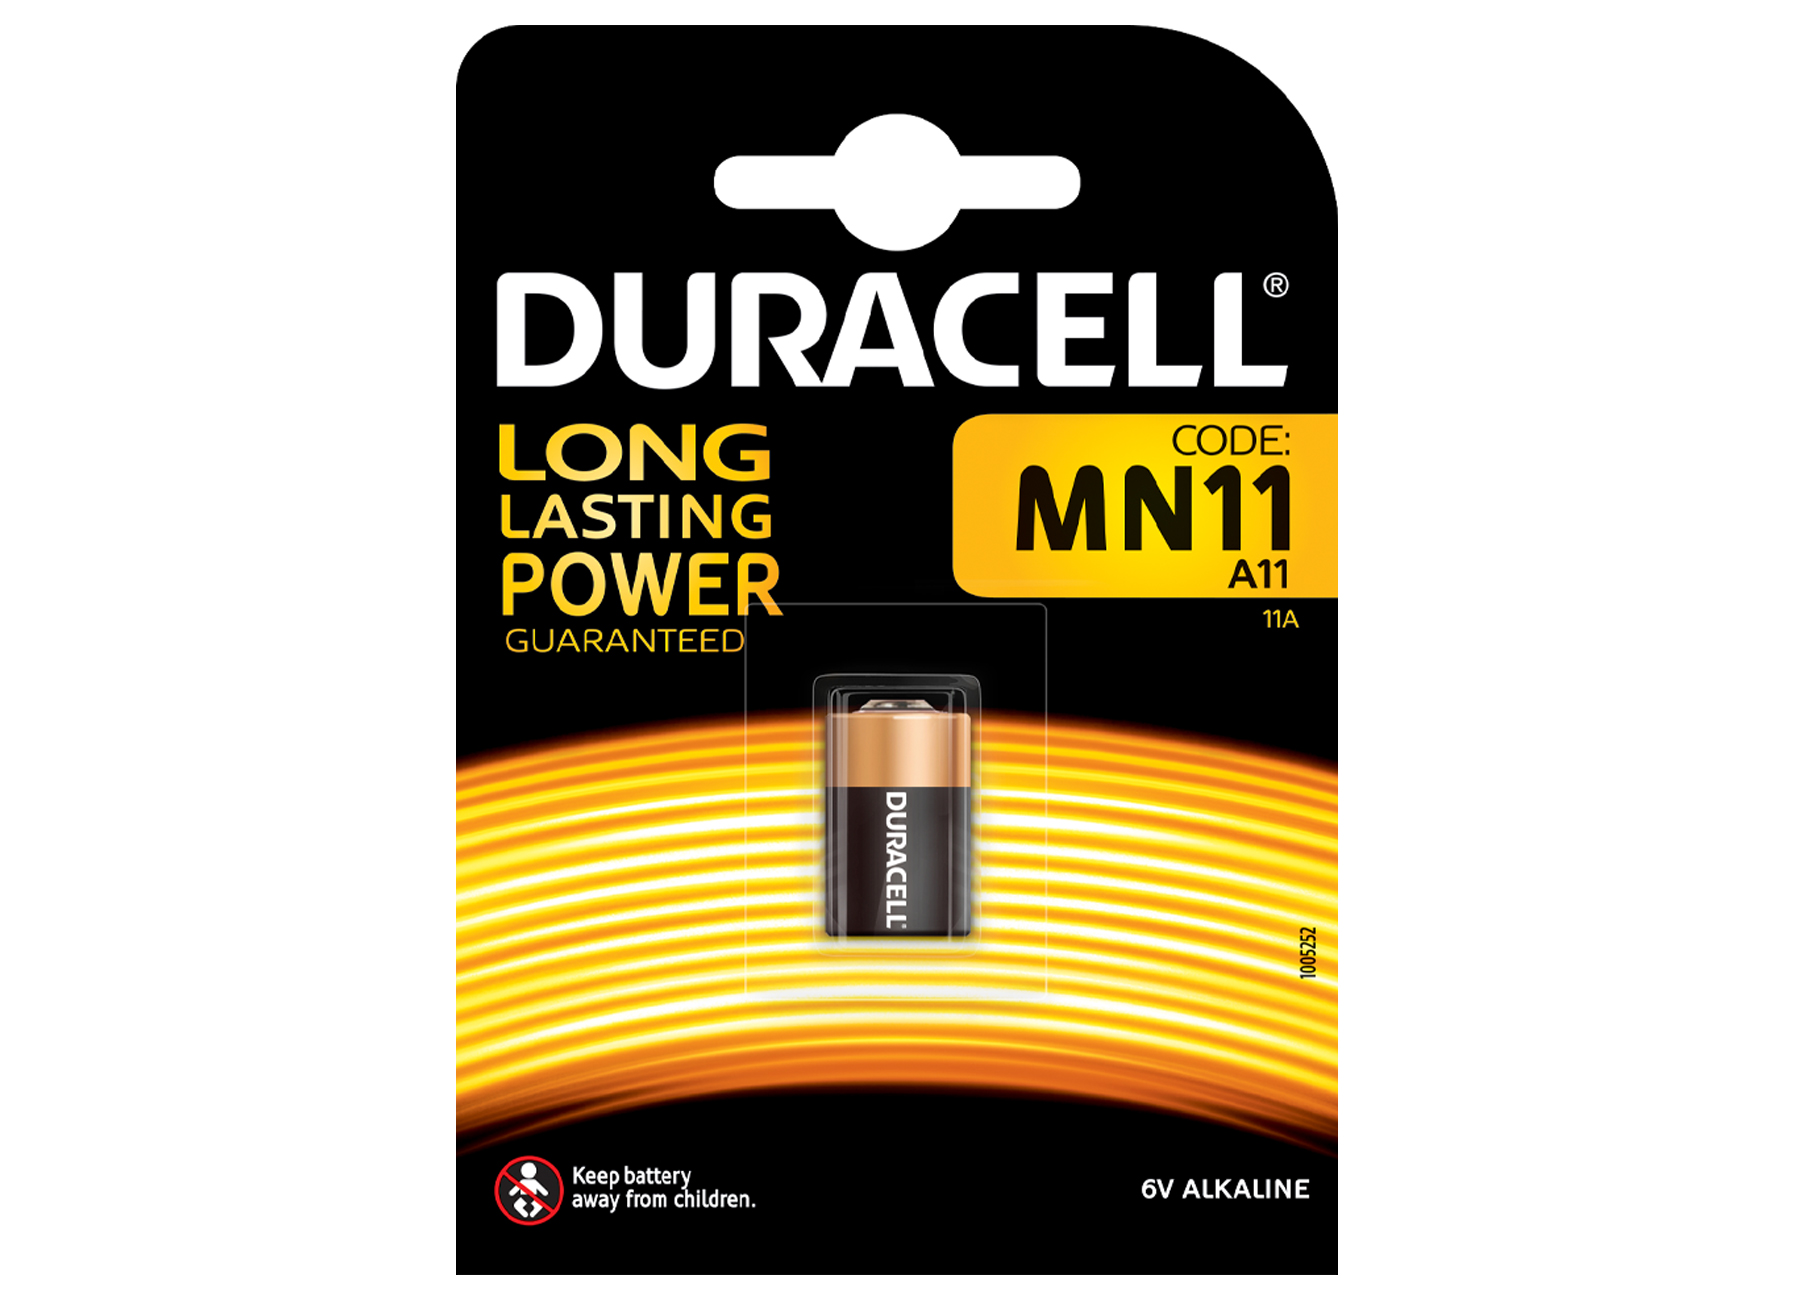 DURACELL SPECIALTY ALKALINE N11 1-PACK MN11